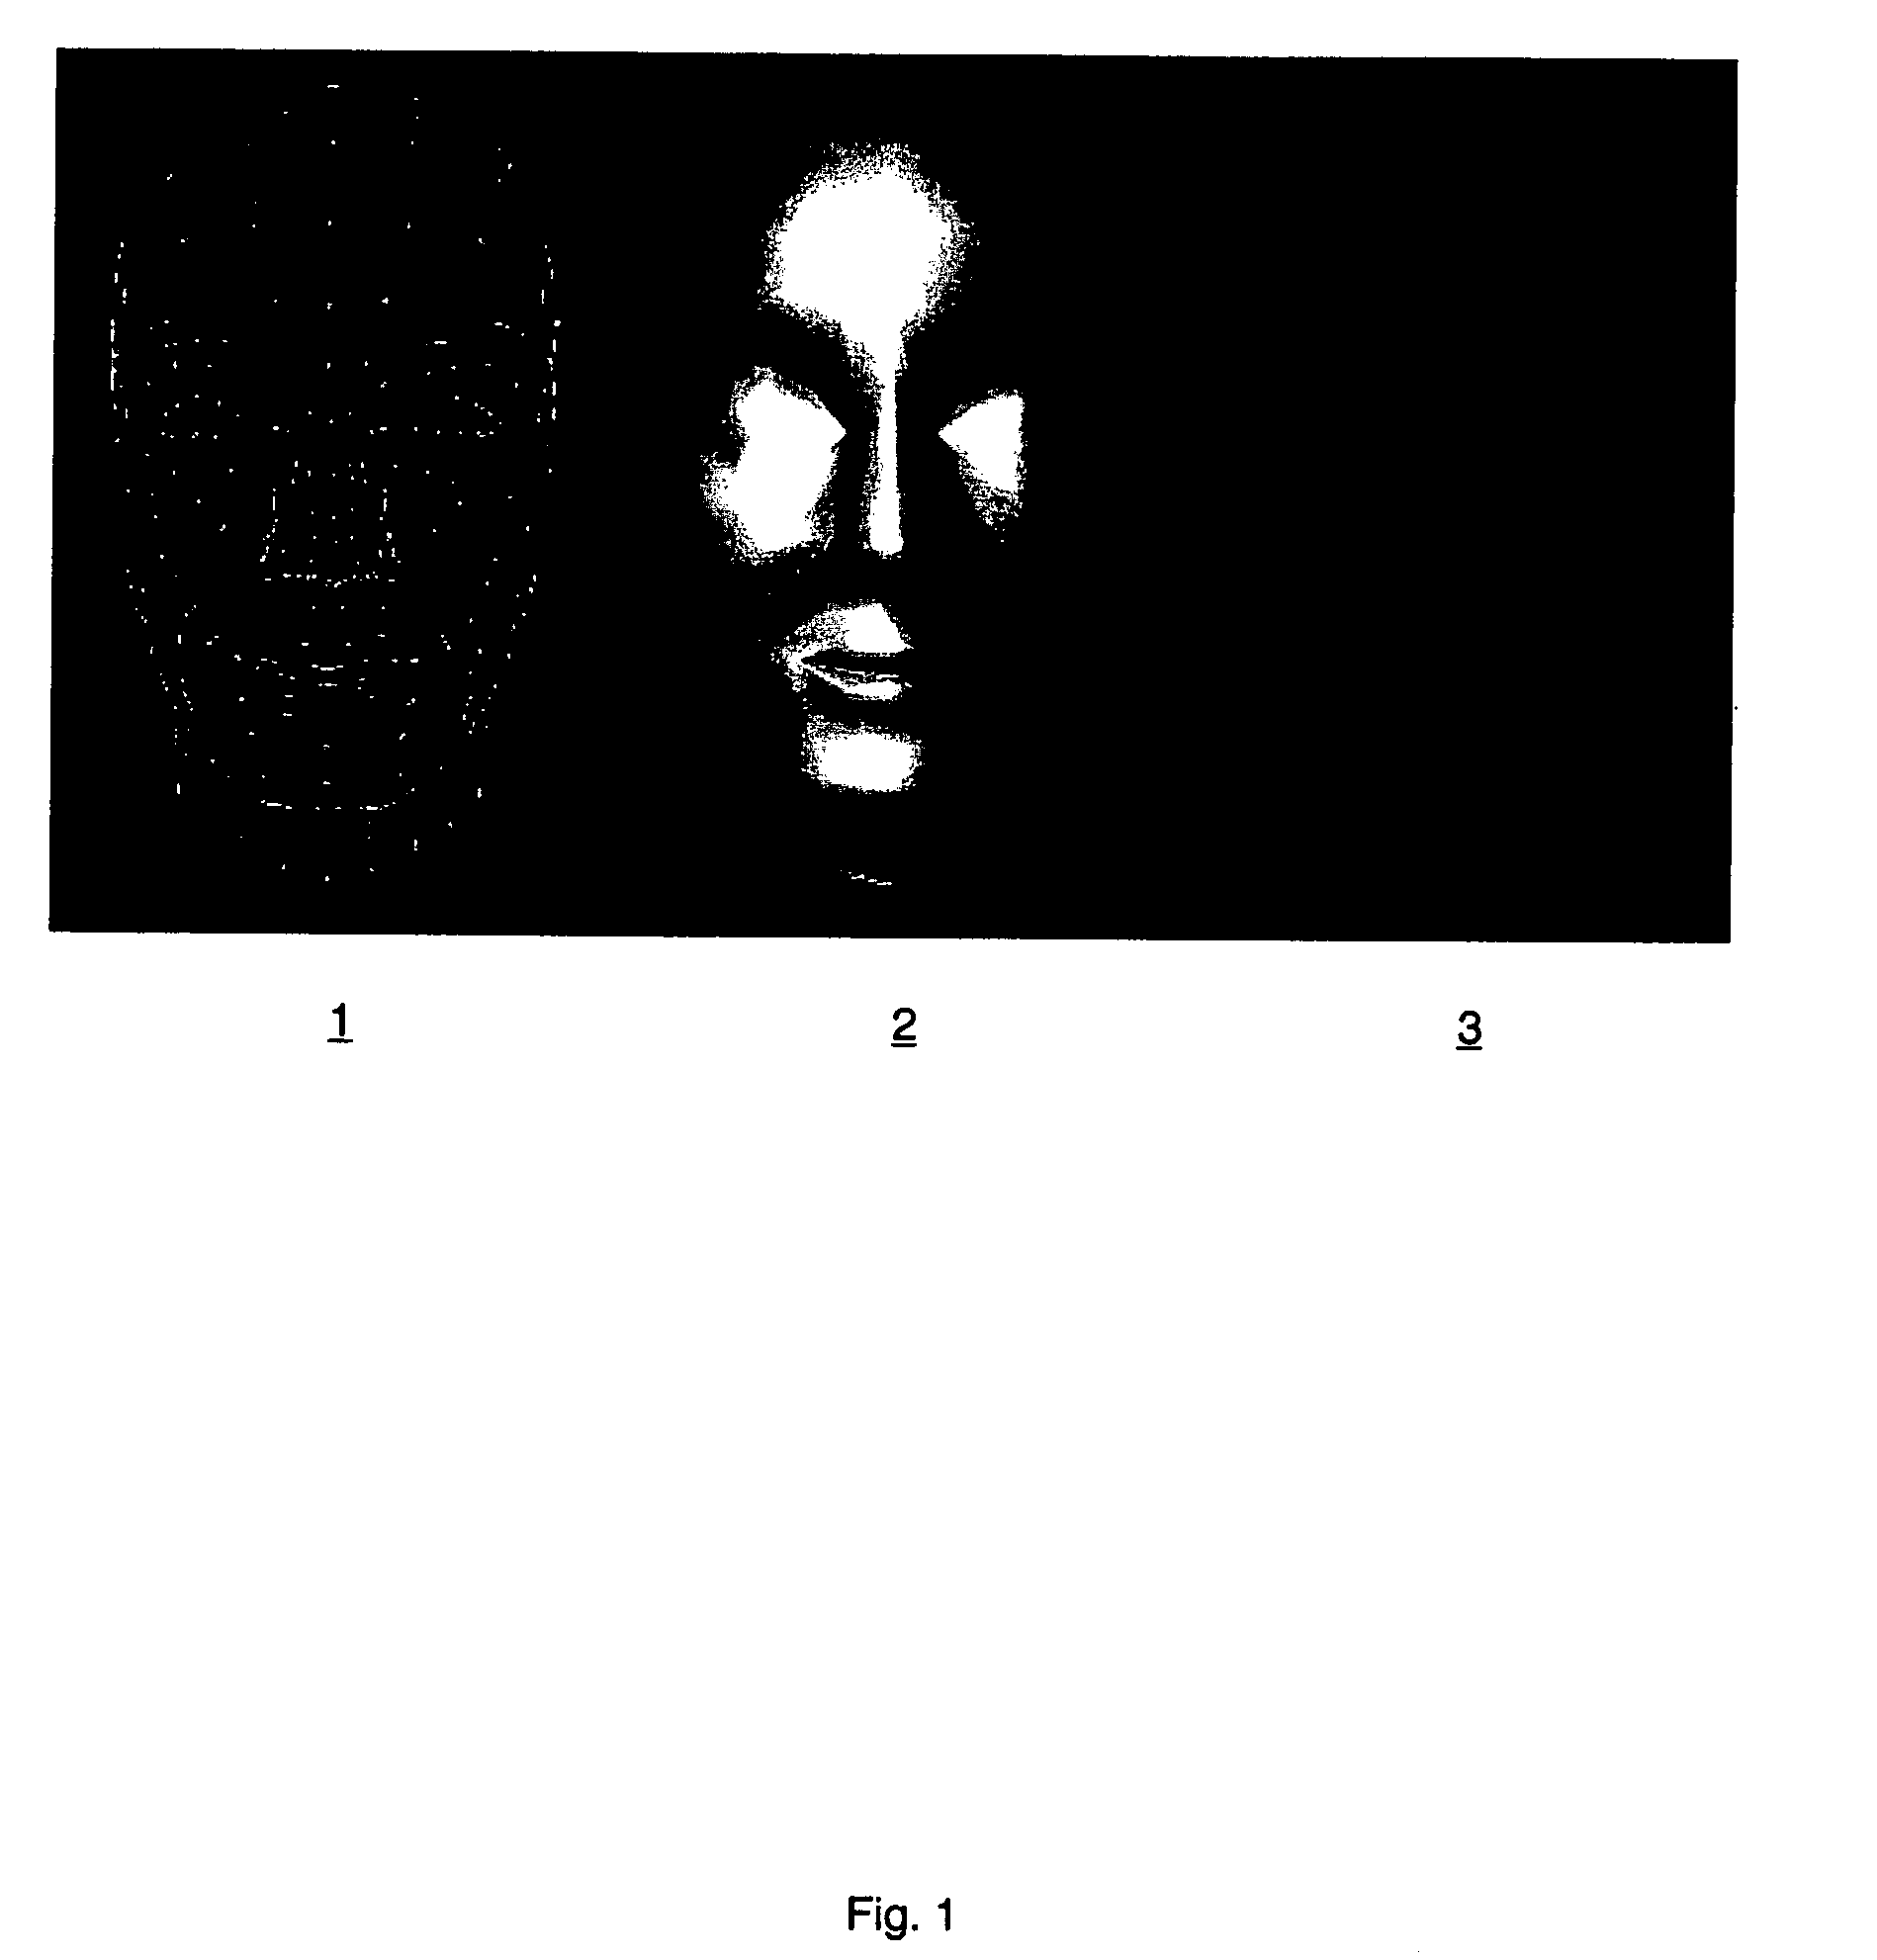 Method of animating a synthesised model of a human face driven by an acoustic signal